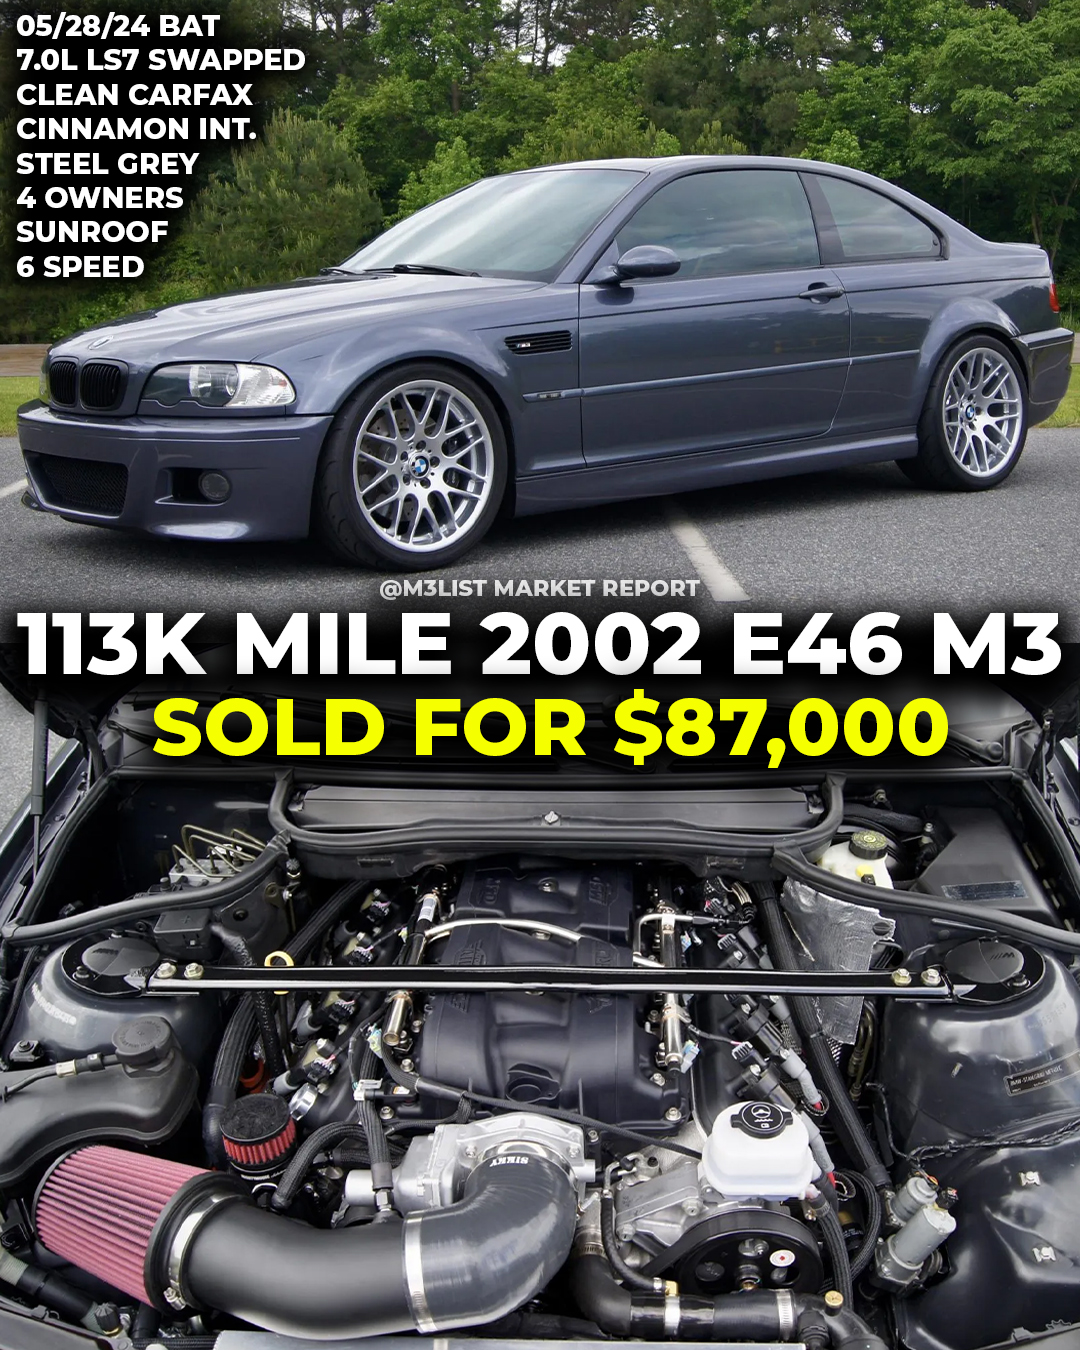 7 liter LS7 swapped BMW E46 M3 sells for $87,000 on Bring A Trailer… What a build.